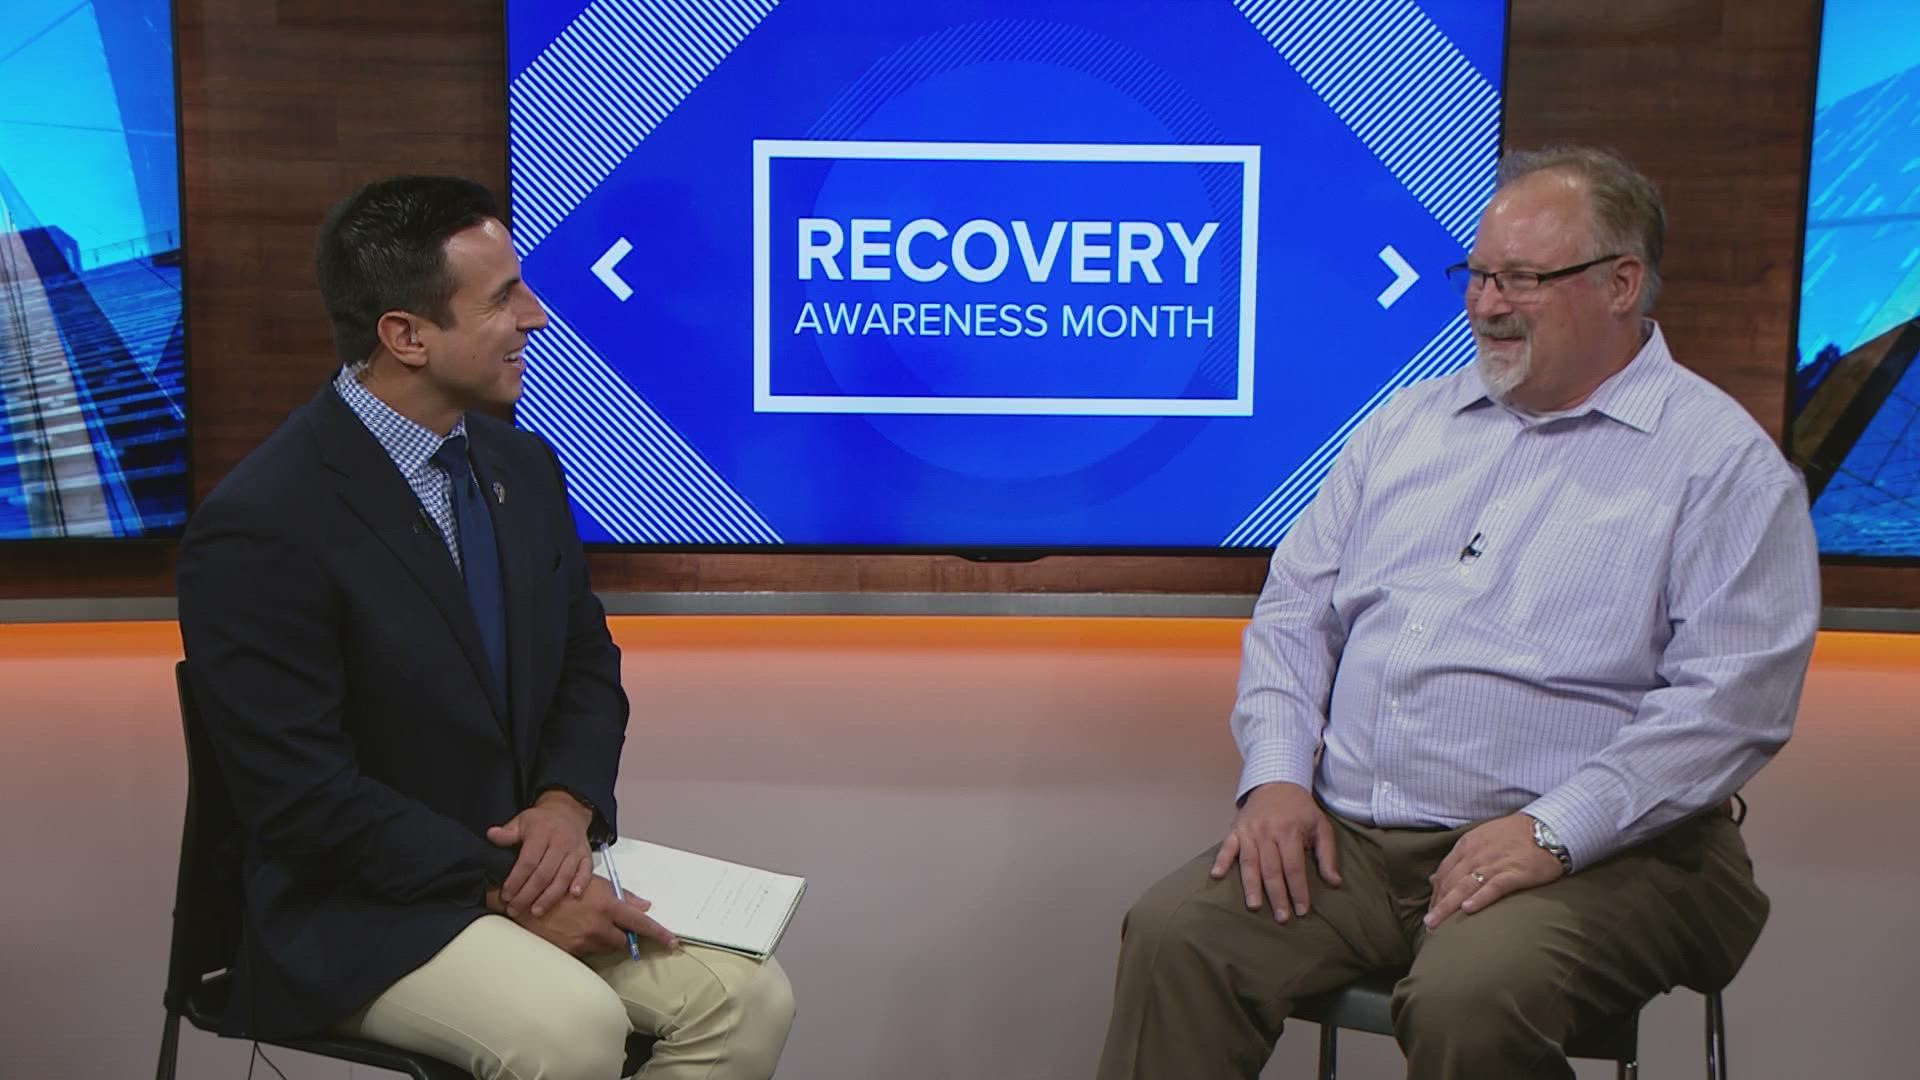 9NEWS anchor Jordan Chavis speaks with therapist Kevin Petersen on how to help others dealing substance abuse.